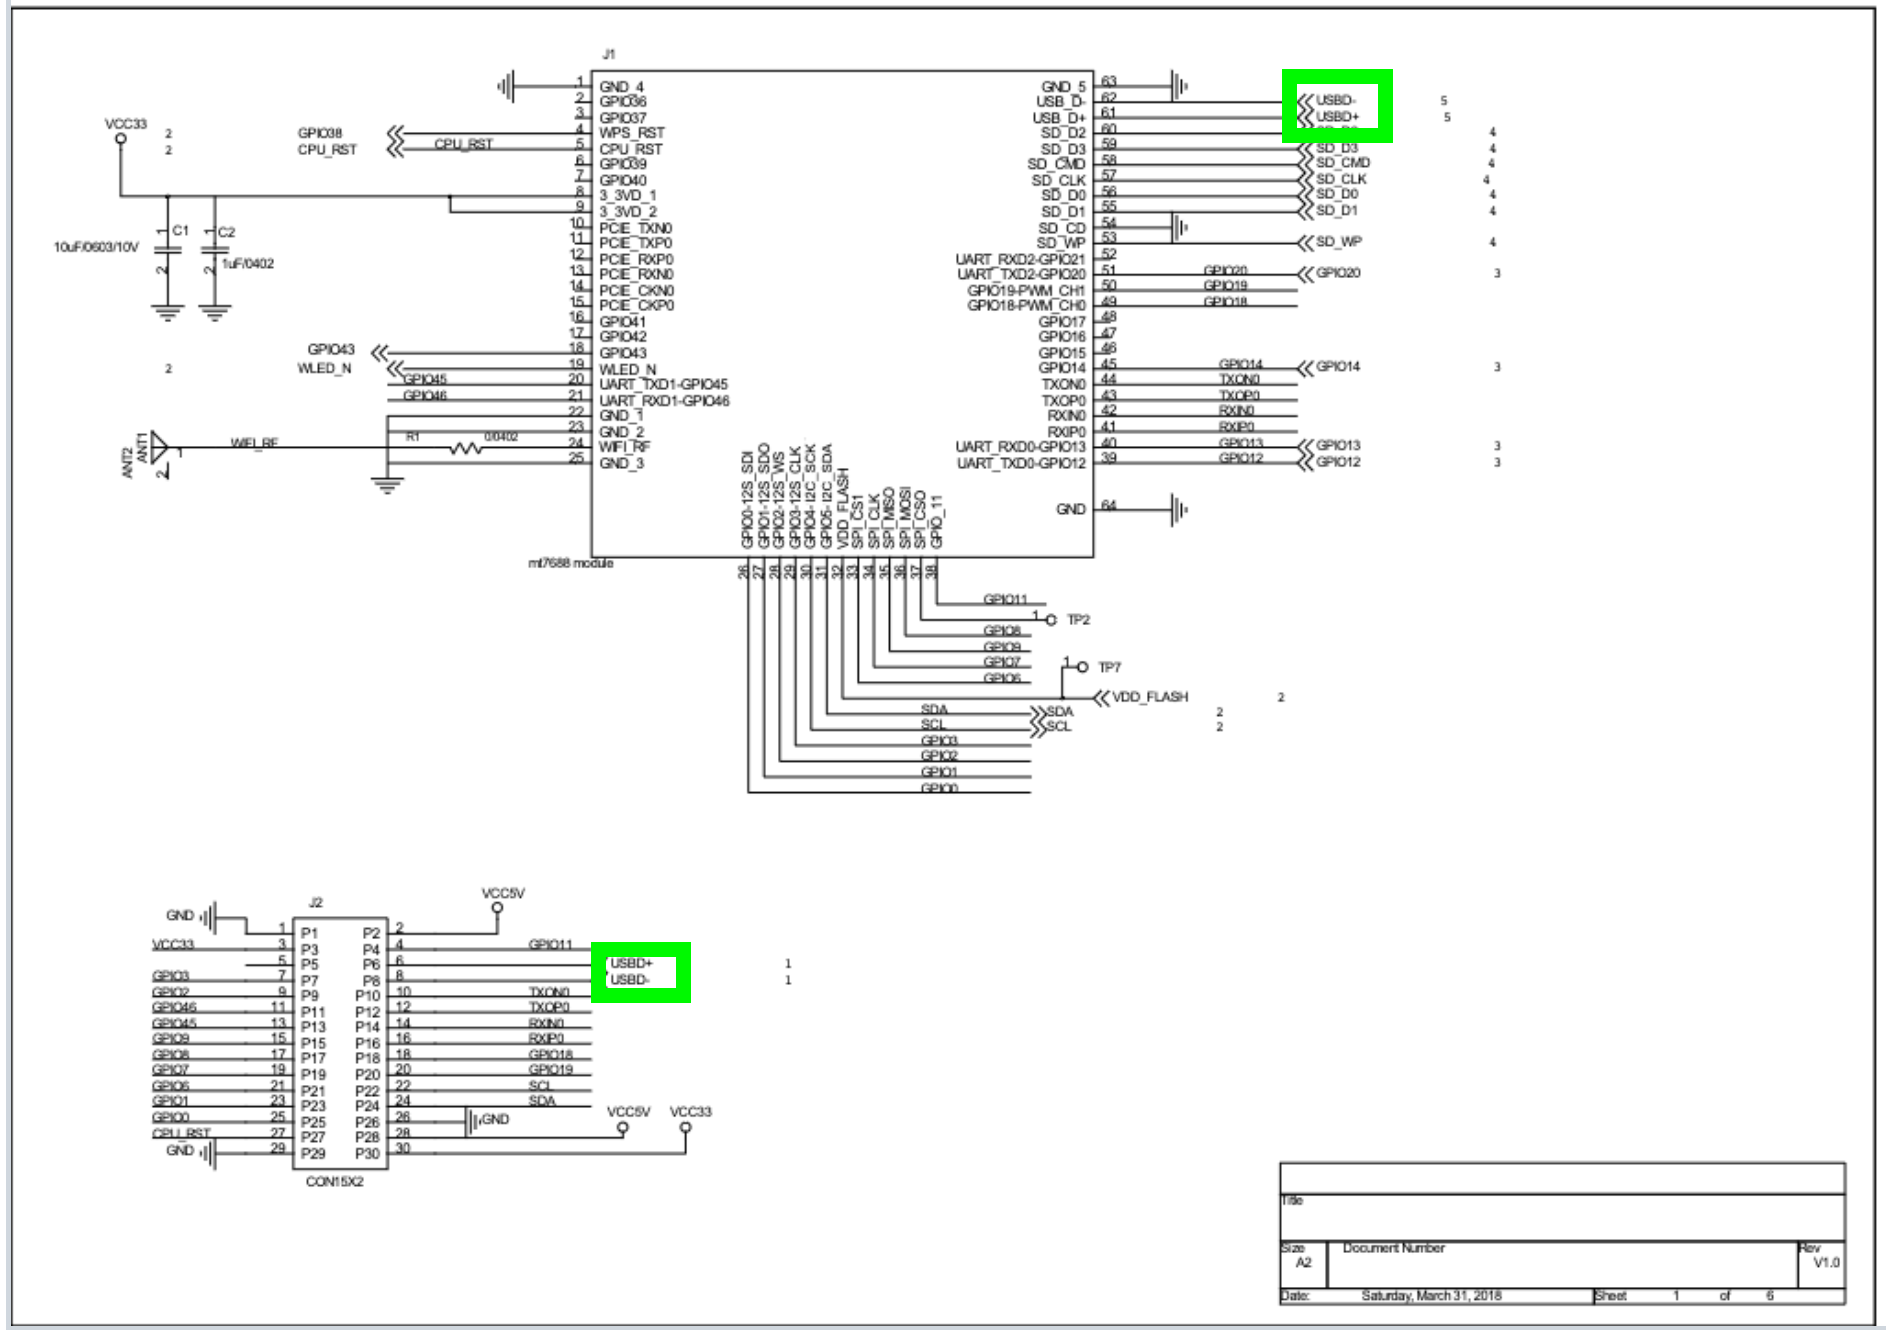 Omega2 Pro schematic highlight 1